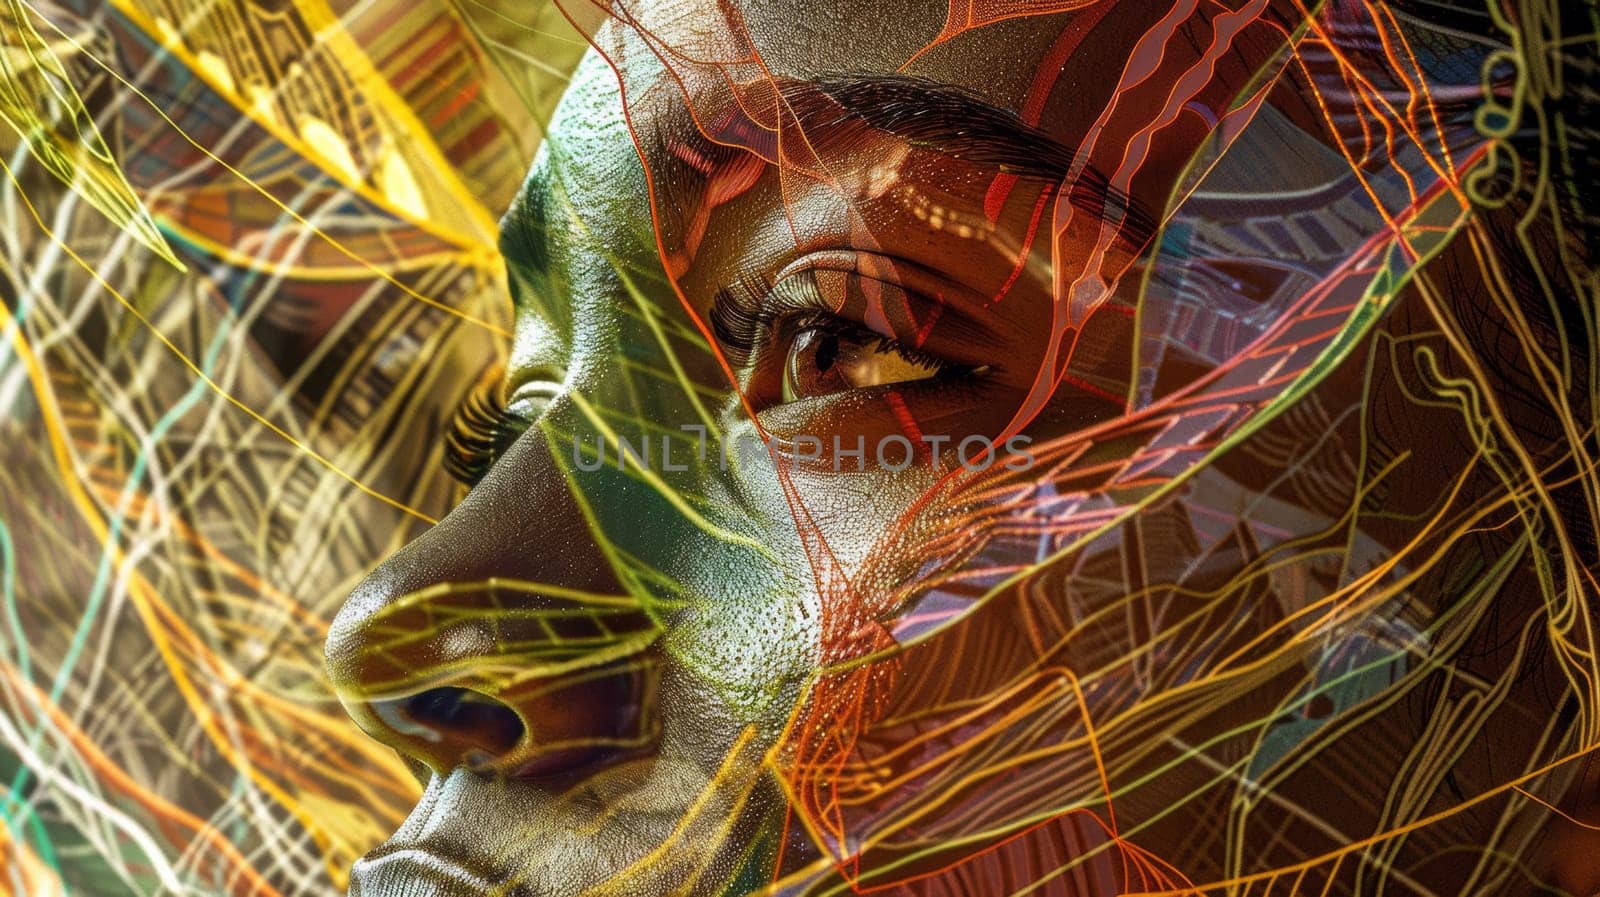 A woman's face is covered in a colorful pattern of lines